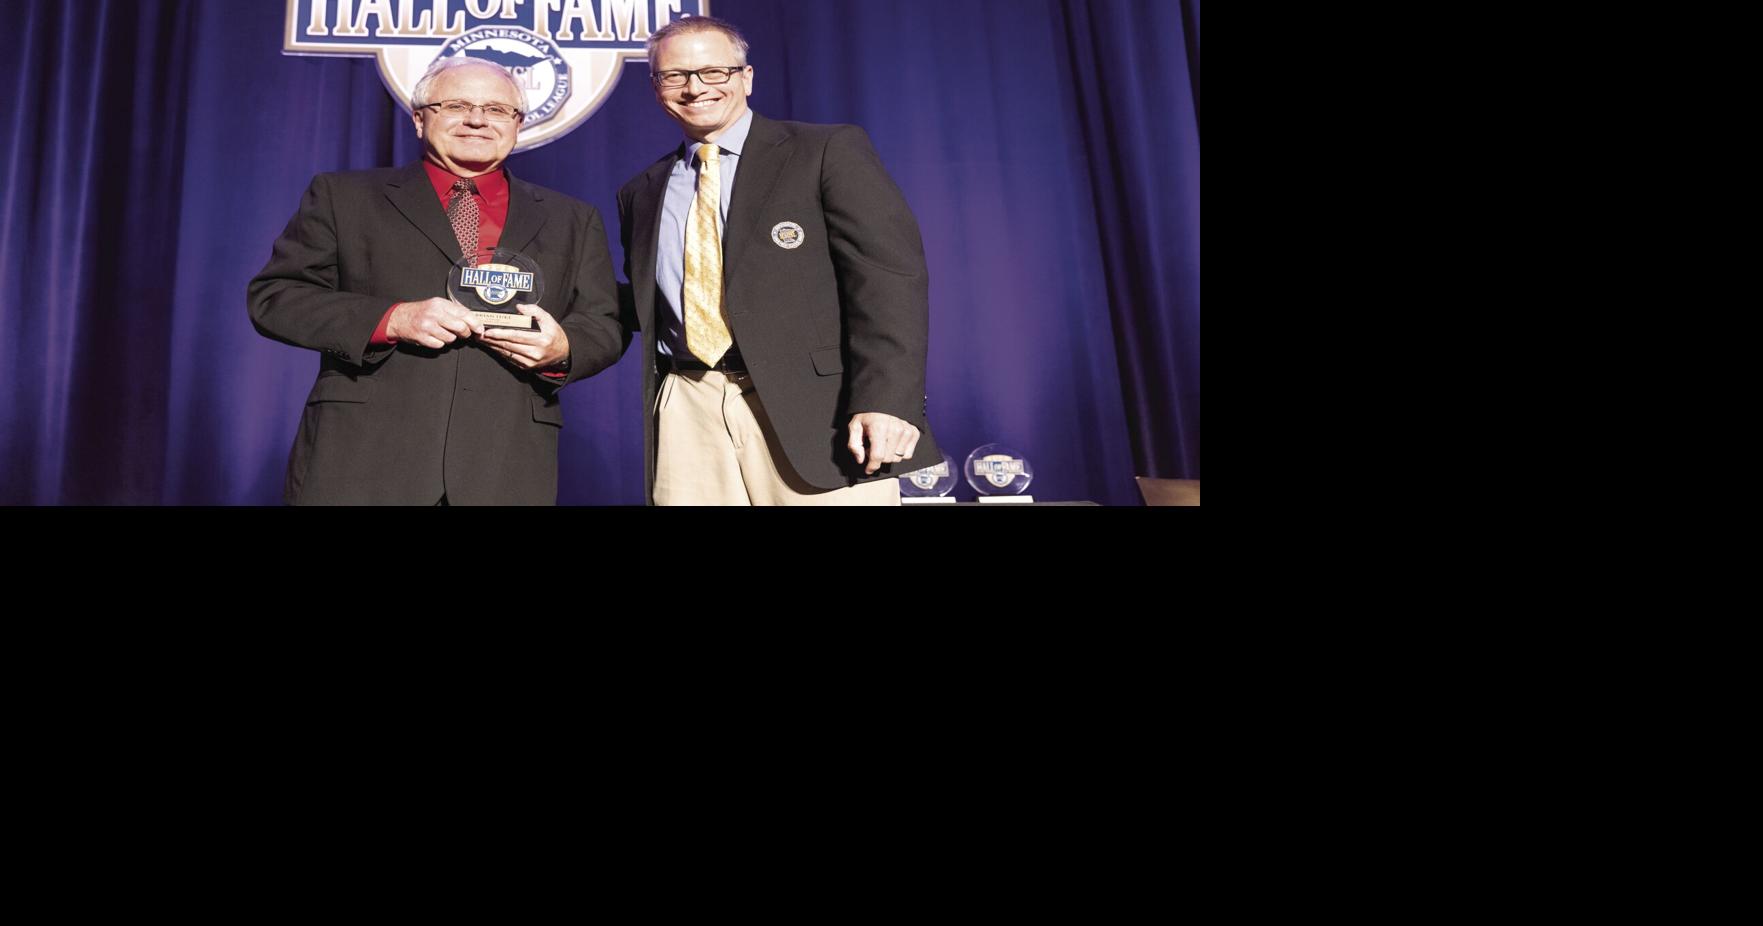 MSHSL inducts Luke into Hall of Fame | Free | hometownsource.com